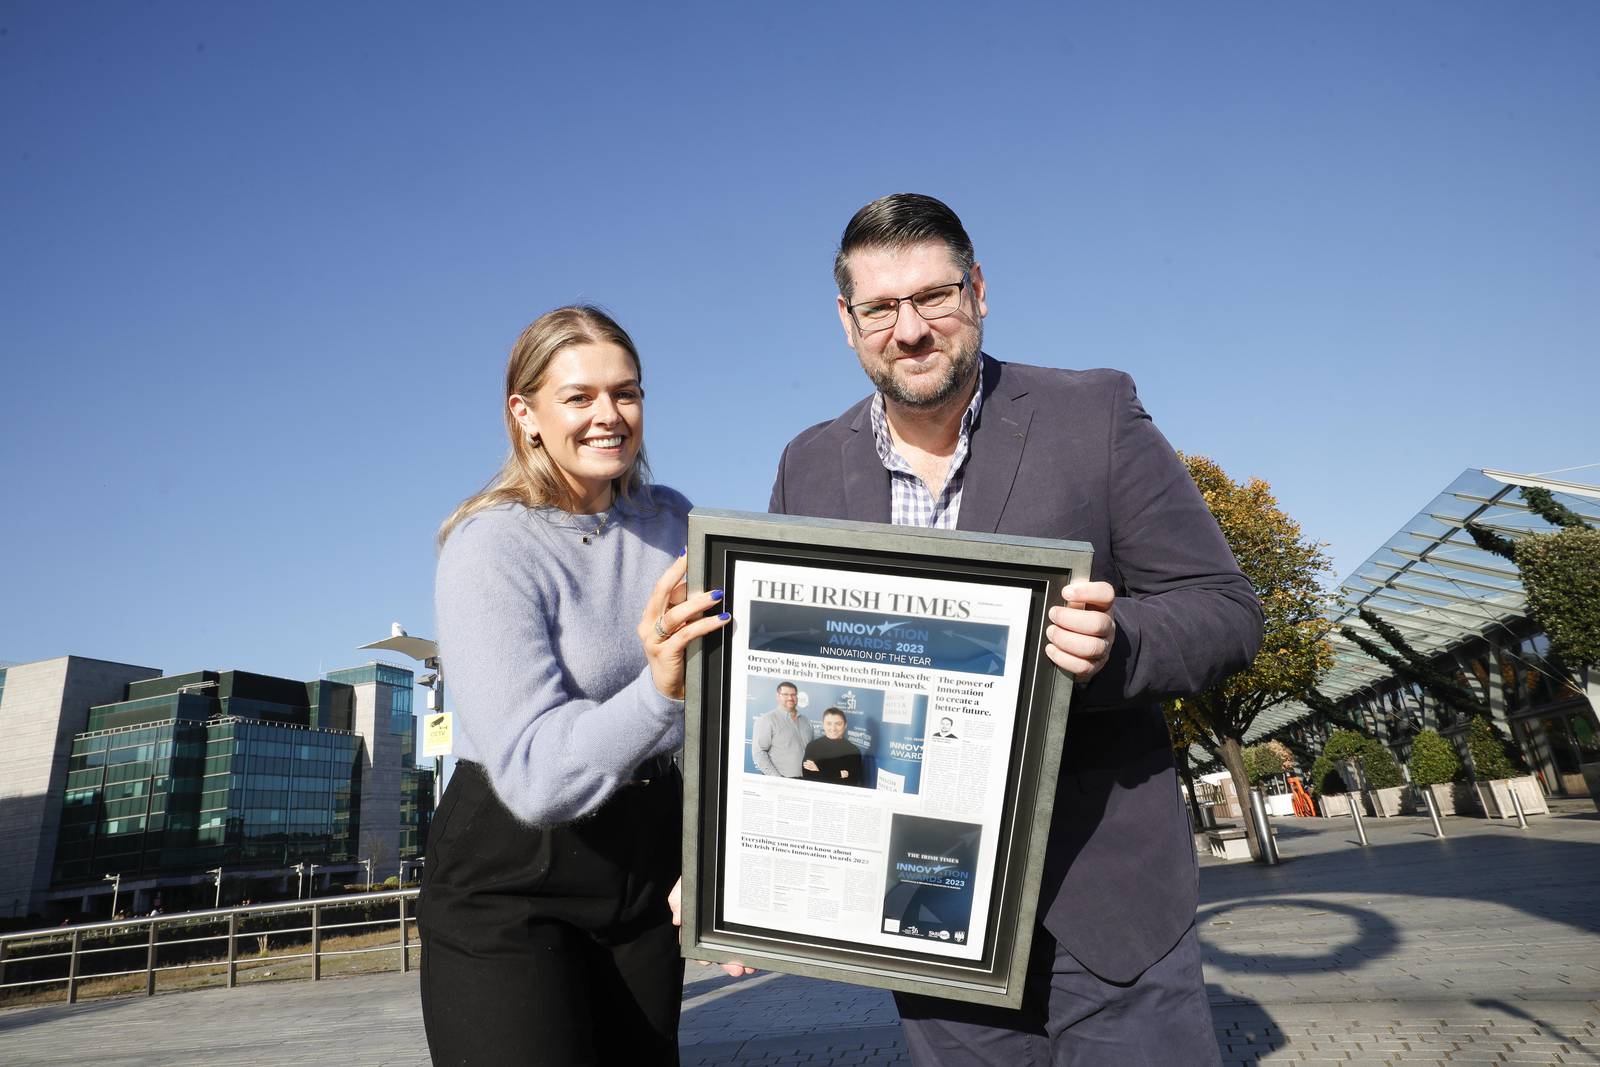 Hannah Thornton and Colin Morrissey of Orreco, winner of the overall Innovation of the year and the IT and Fintech category at The Irish Times Innovation Awards 2023. Photo: Conor McCabe